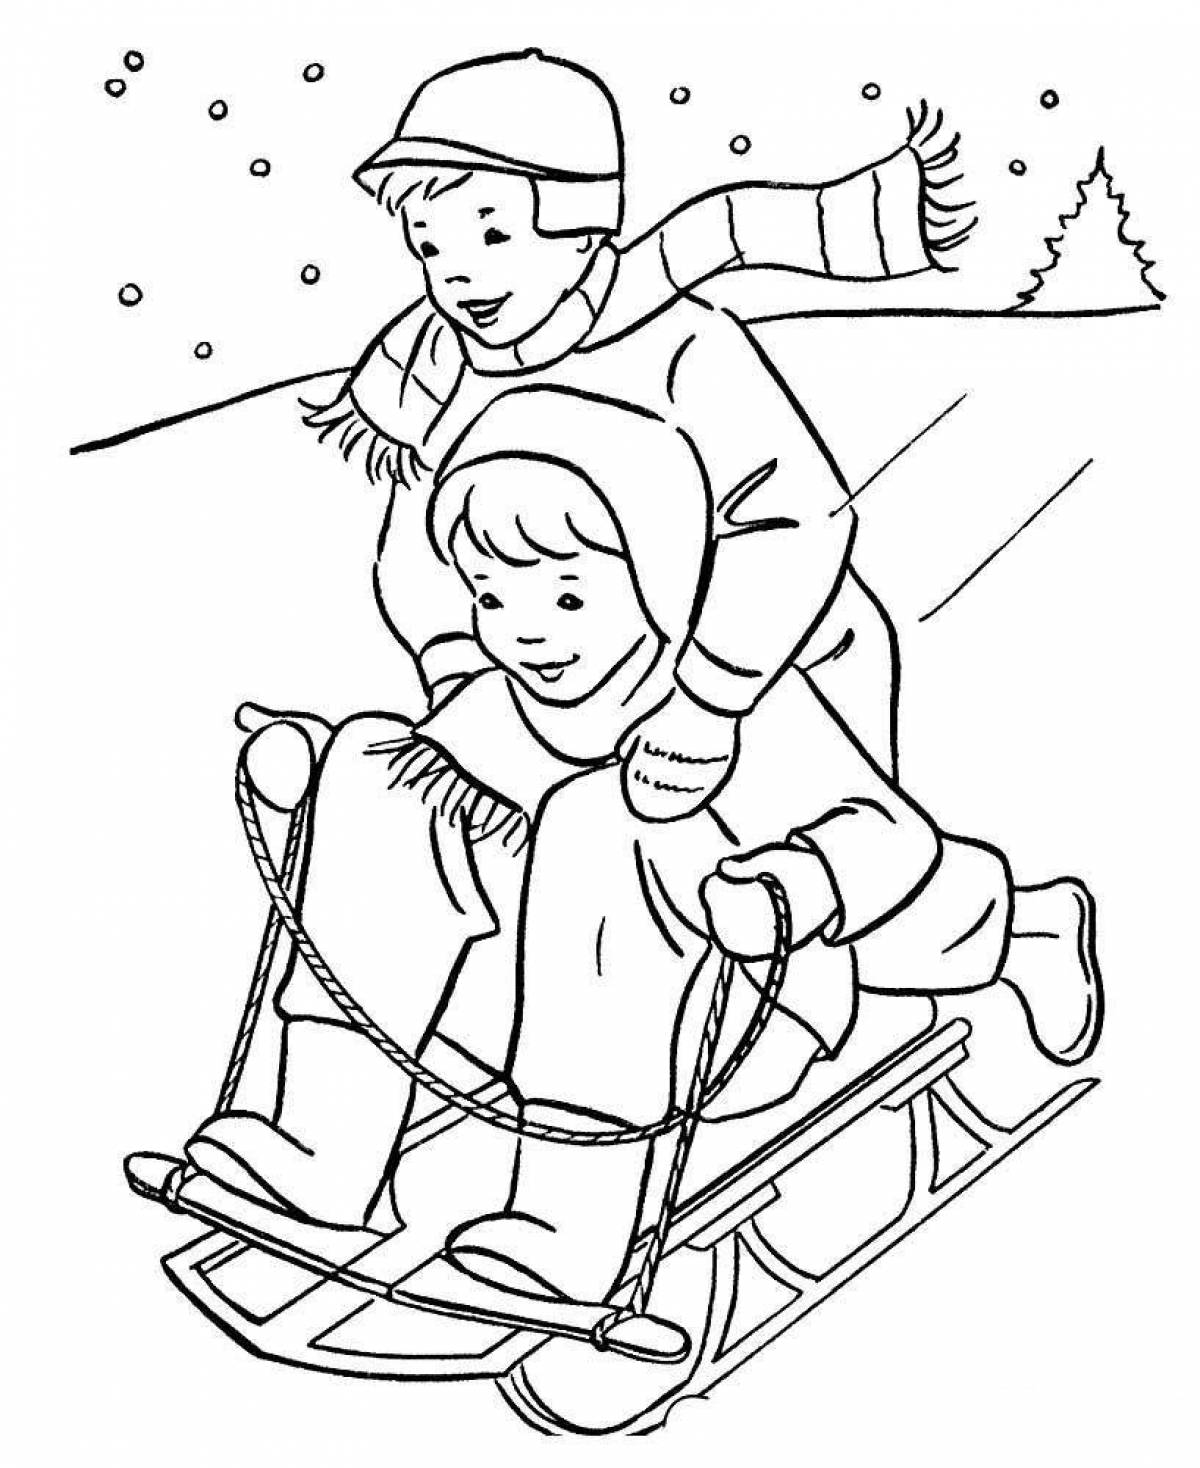 Colorful chuck and huck coloring page